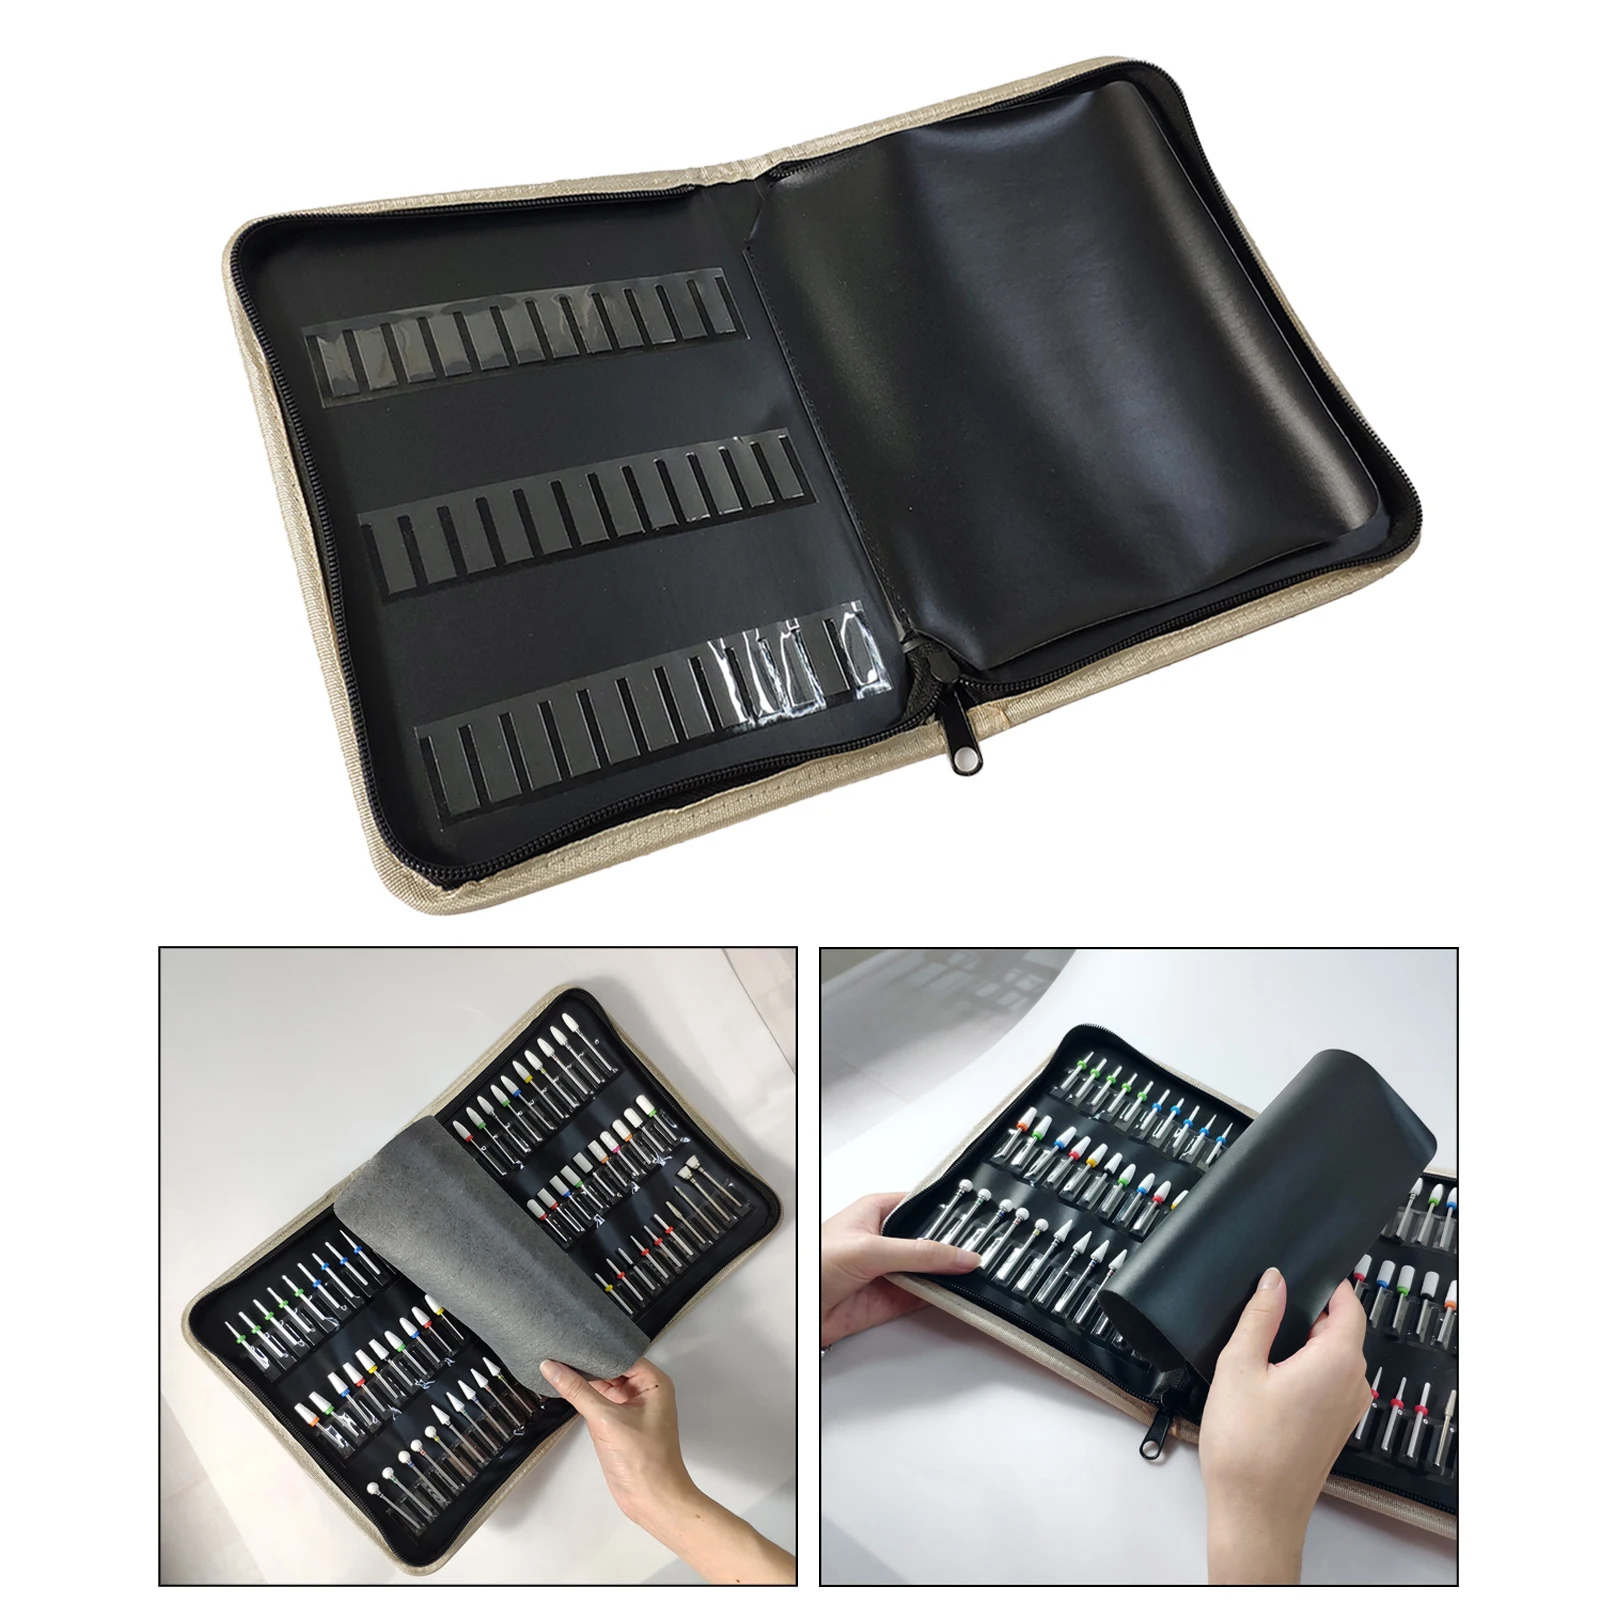 72 Slots Manicure Nail Art Drill Bits Holder Storage Case Easy Carry